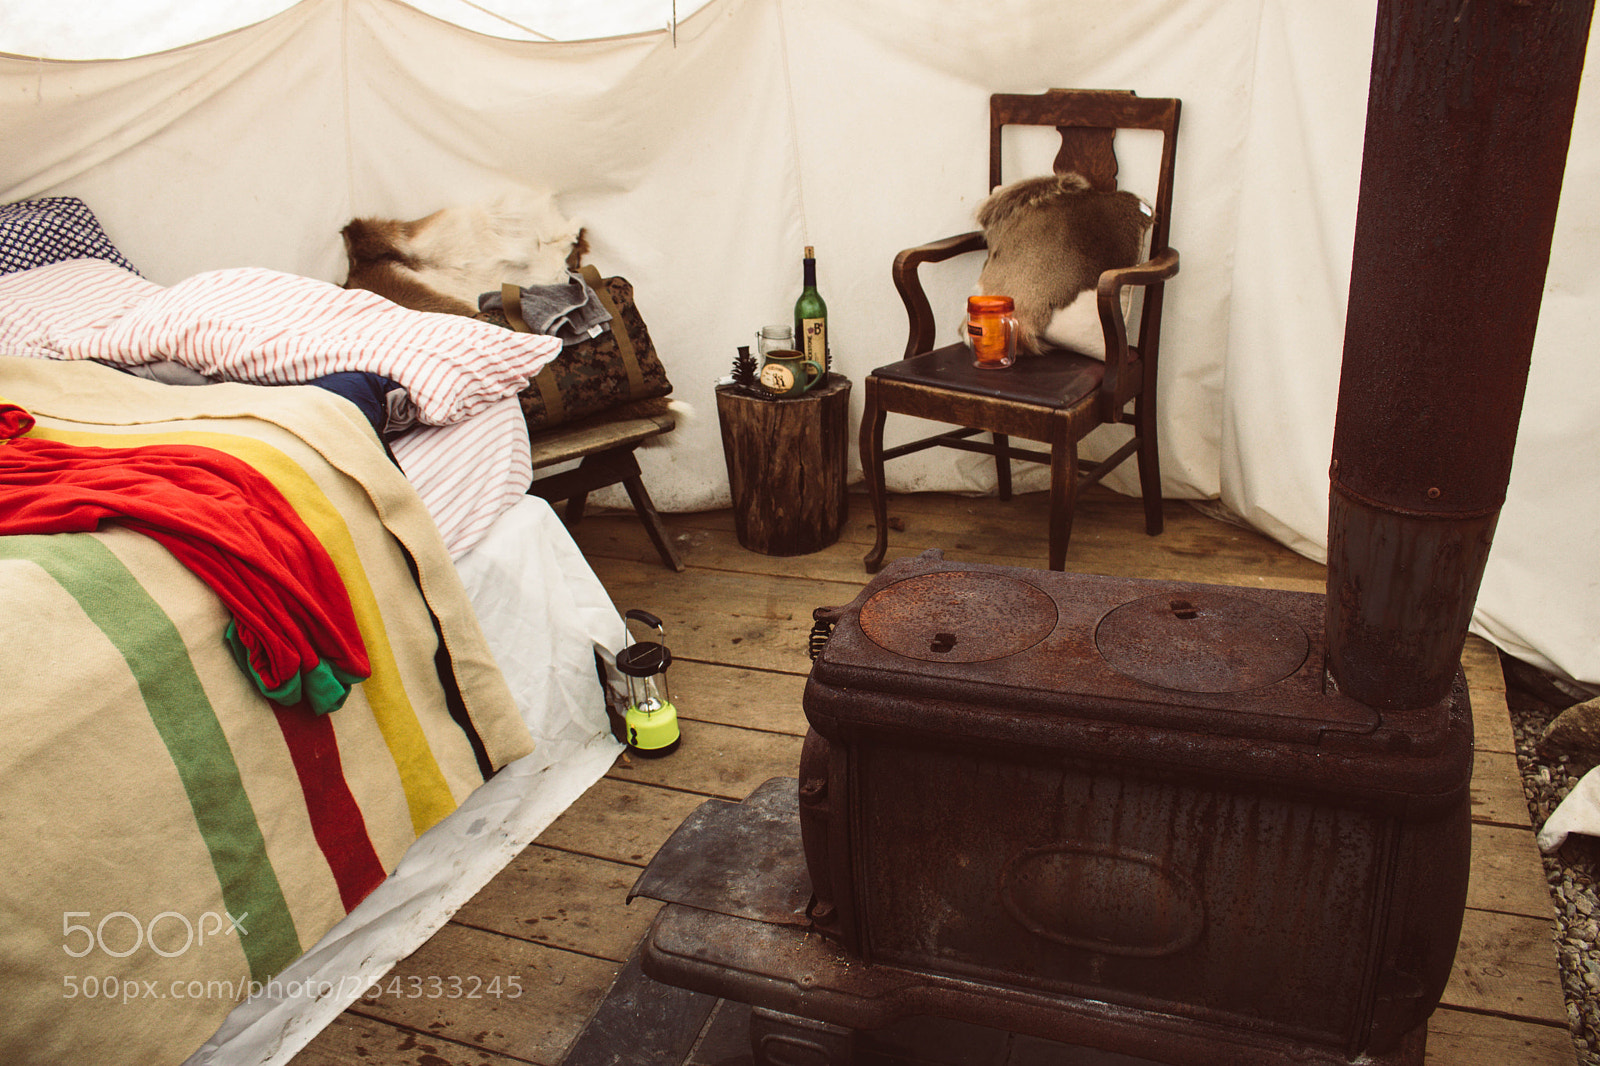 Canon EOS 750D (EOS Rebel T6i / EOS Kiss X8i) sample photo. Winter glamping land photography